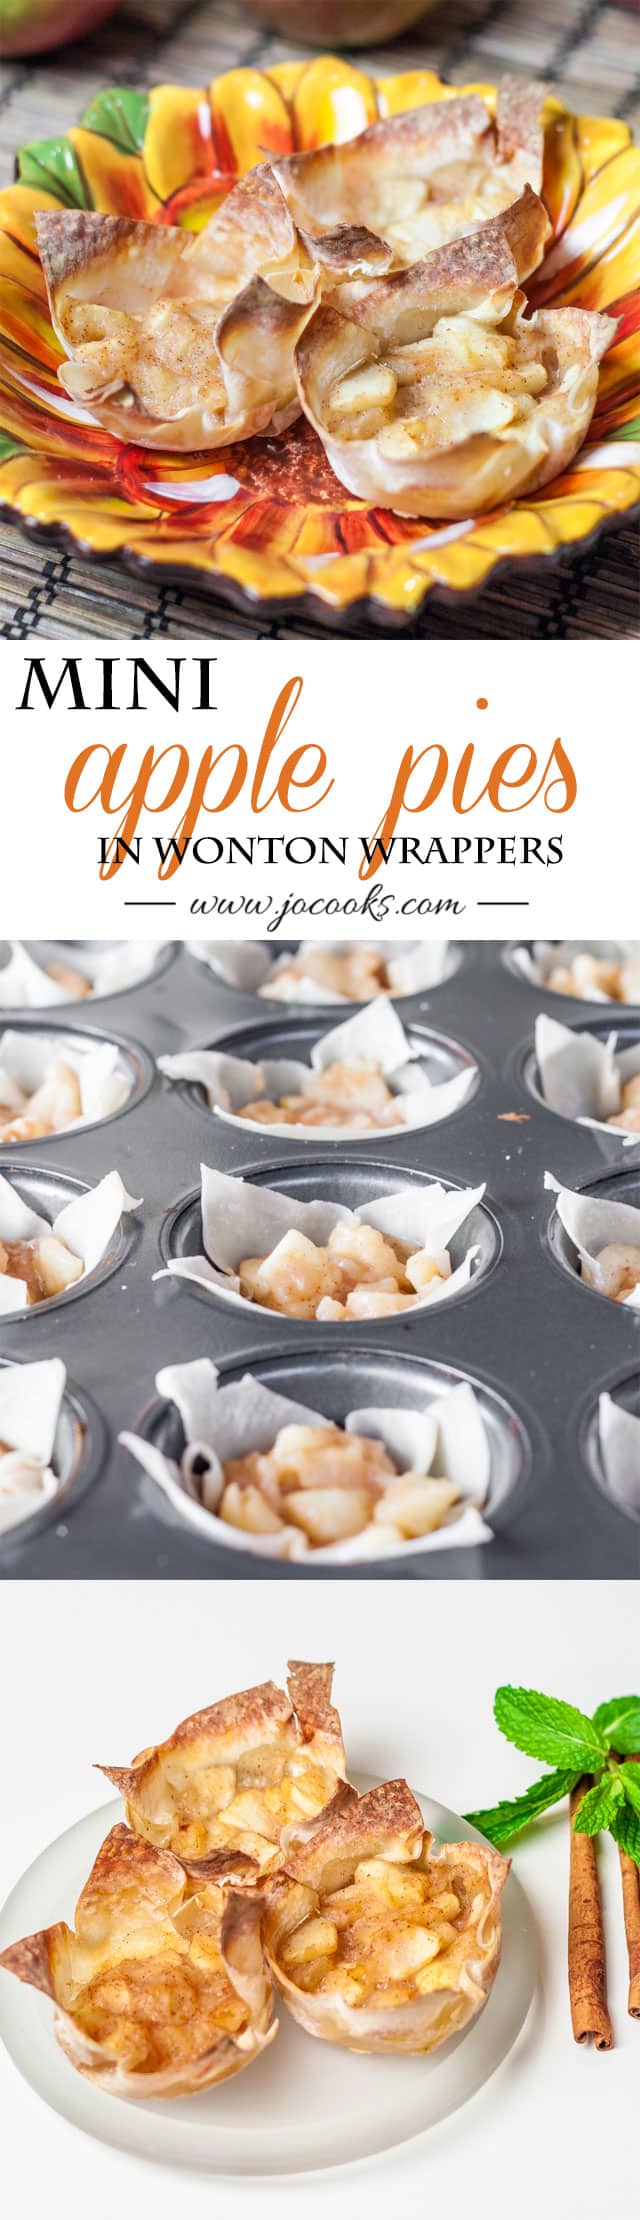 mini-apple-pies-in-wonton-wrappers-collage